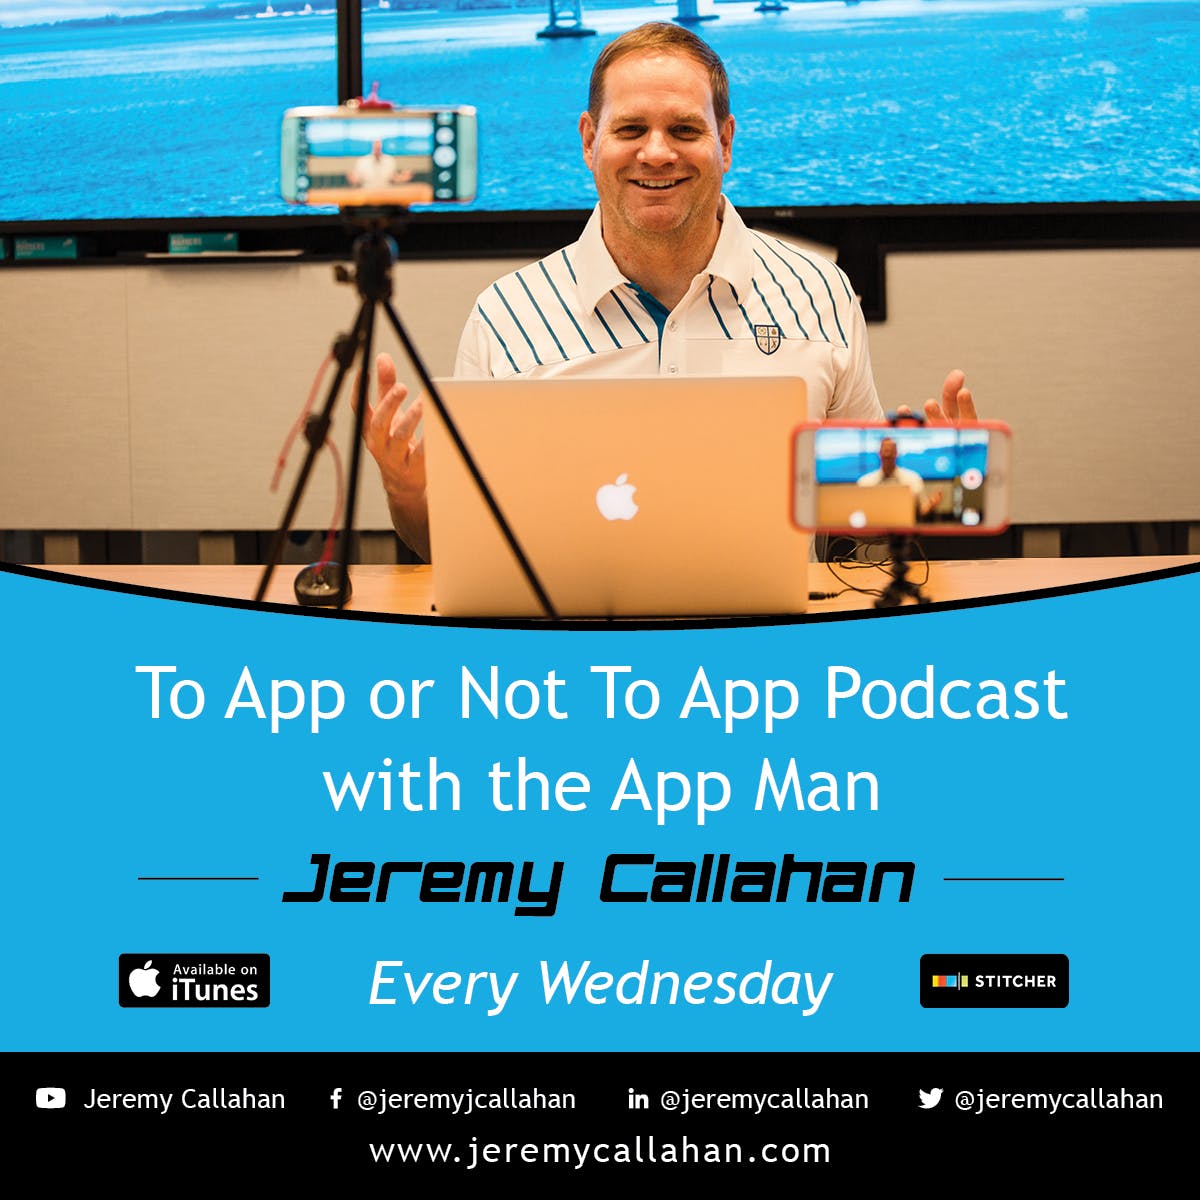 To App or Not To App Podcast media 2